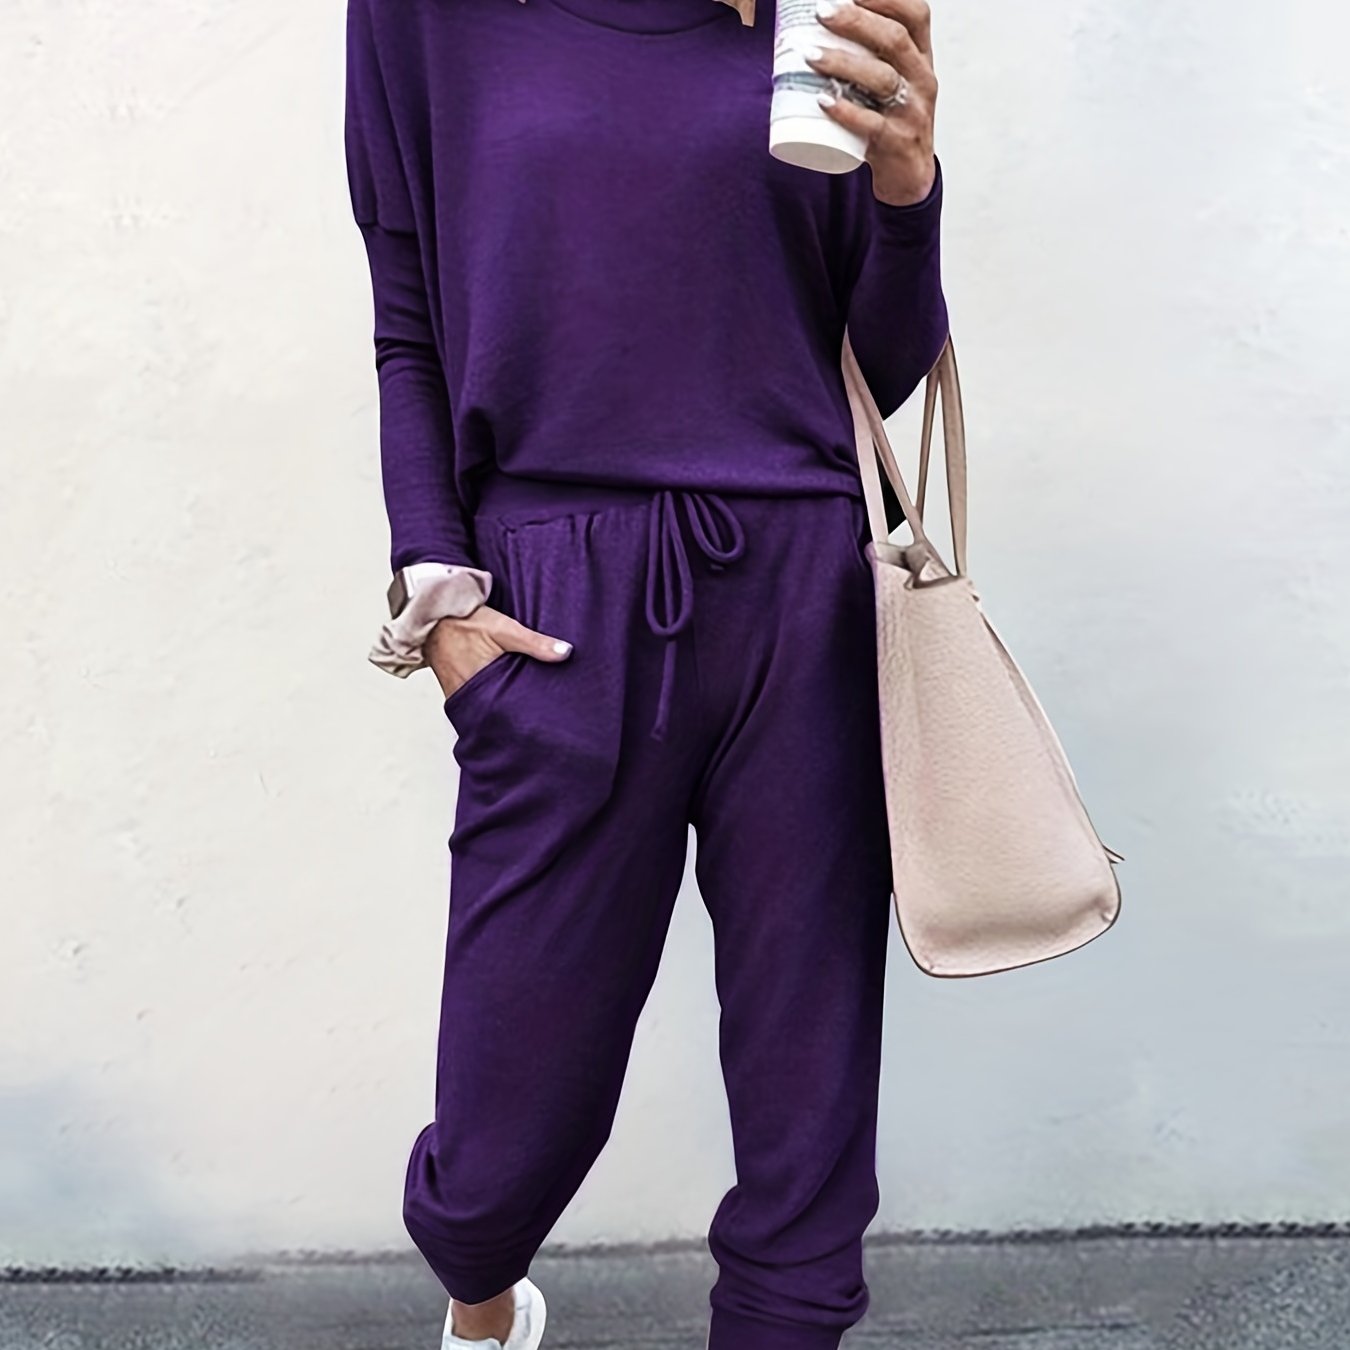 Casual Solid Two-piece Set, Long Sleeve T-shirt & Drawstring Pants Outfits, Women's Clothing Purple